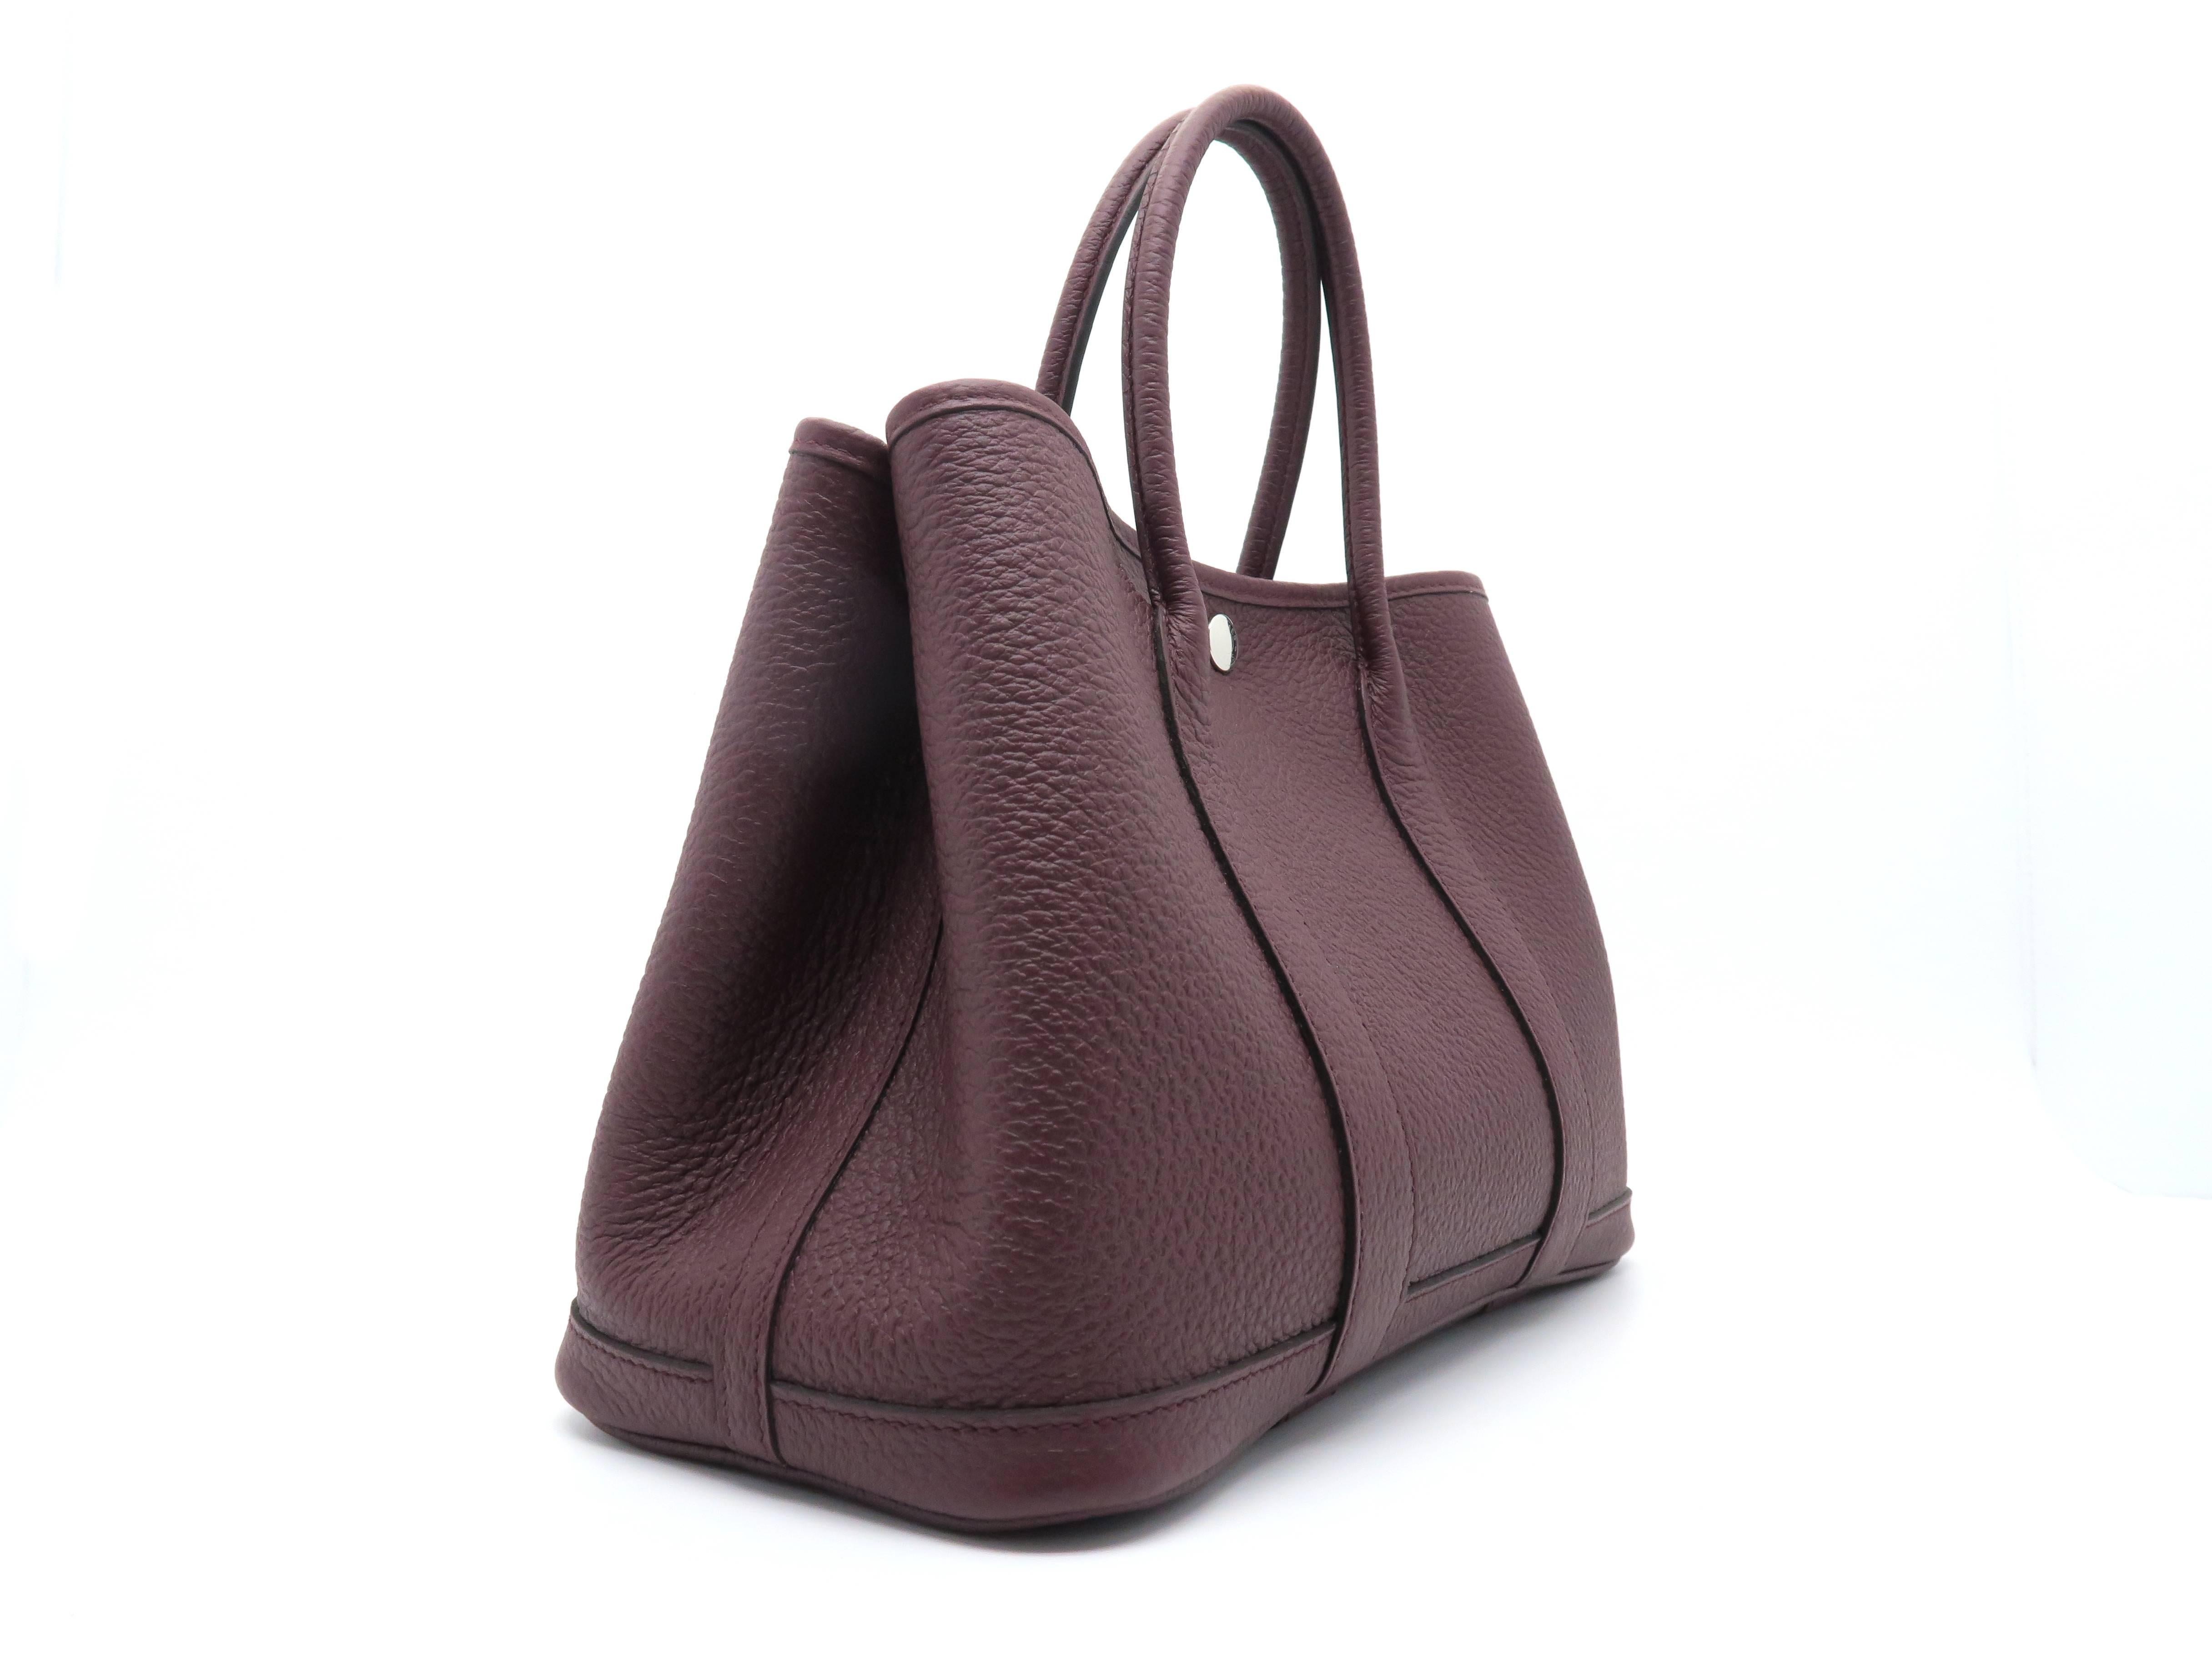 Color: Wine Red / Bordeaux (designer color) 

Material: Clemence Leather 

Condition: Rank N 
Overall: Brand New. 
Surface: Good
Corners: Good
Edges: Good
Handles/ straps: Good
Hardware: Good

Dimension: W30 × H21 × D14cm（W11.8" × H8.2" ×